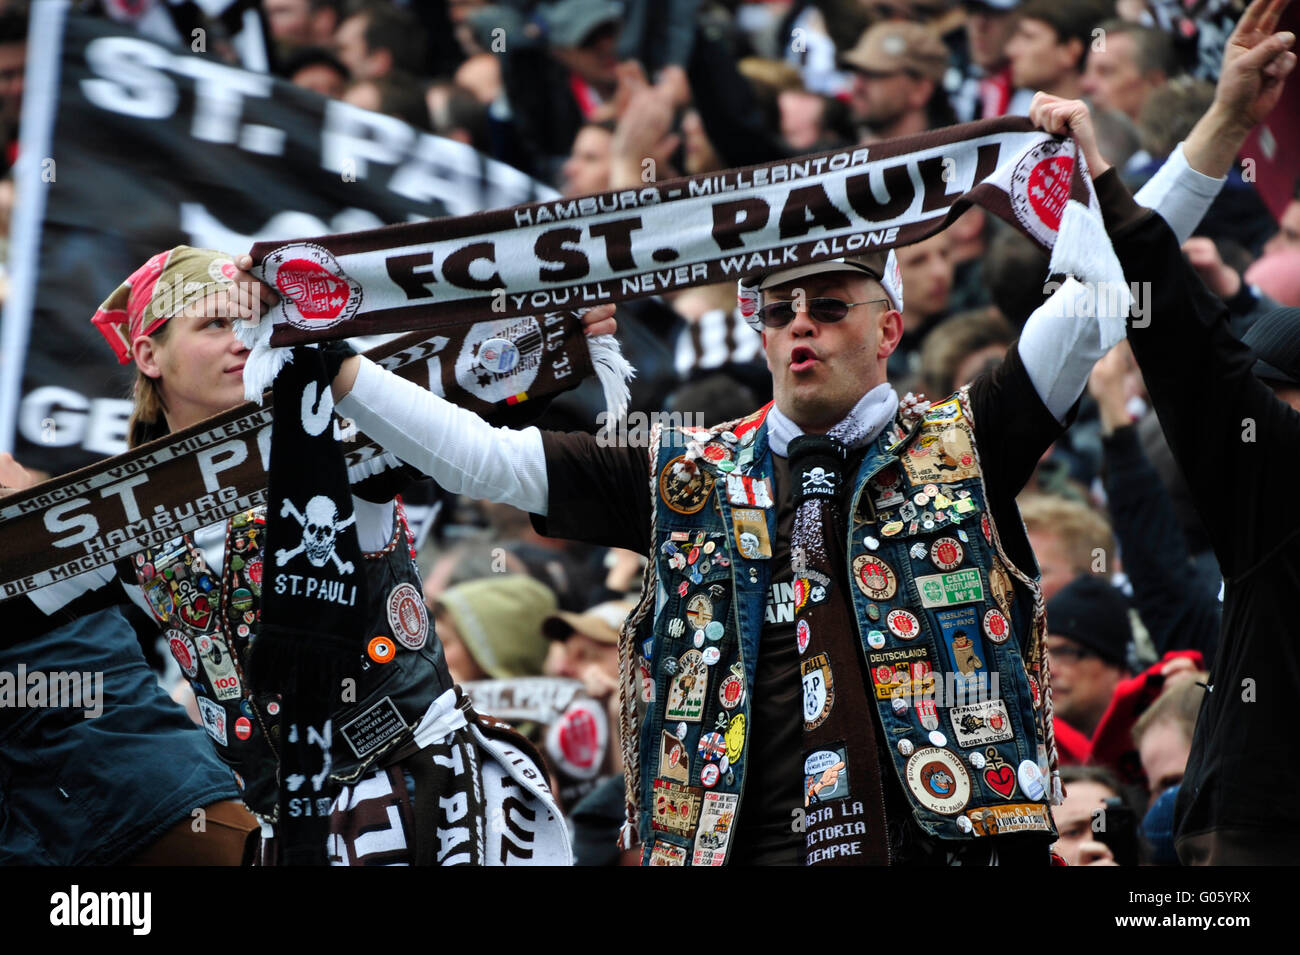 St Pauli Fans High Resolution Stock Photography and Images - Alamy